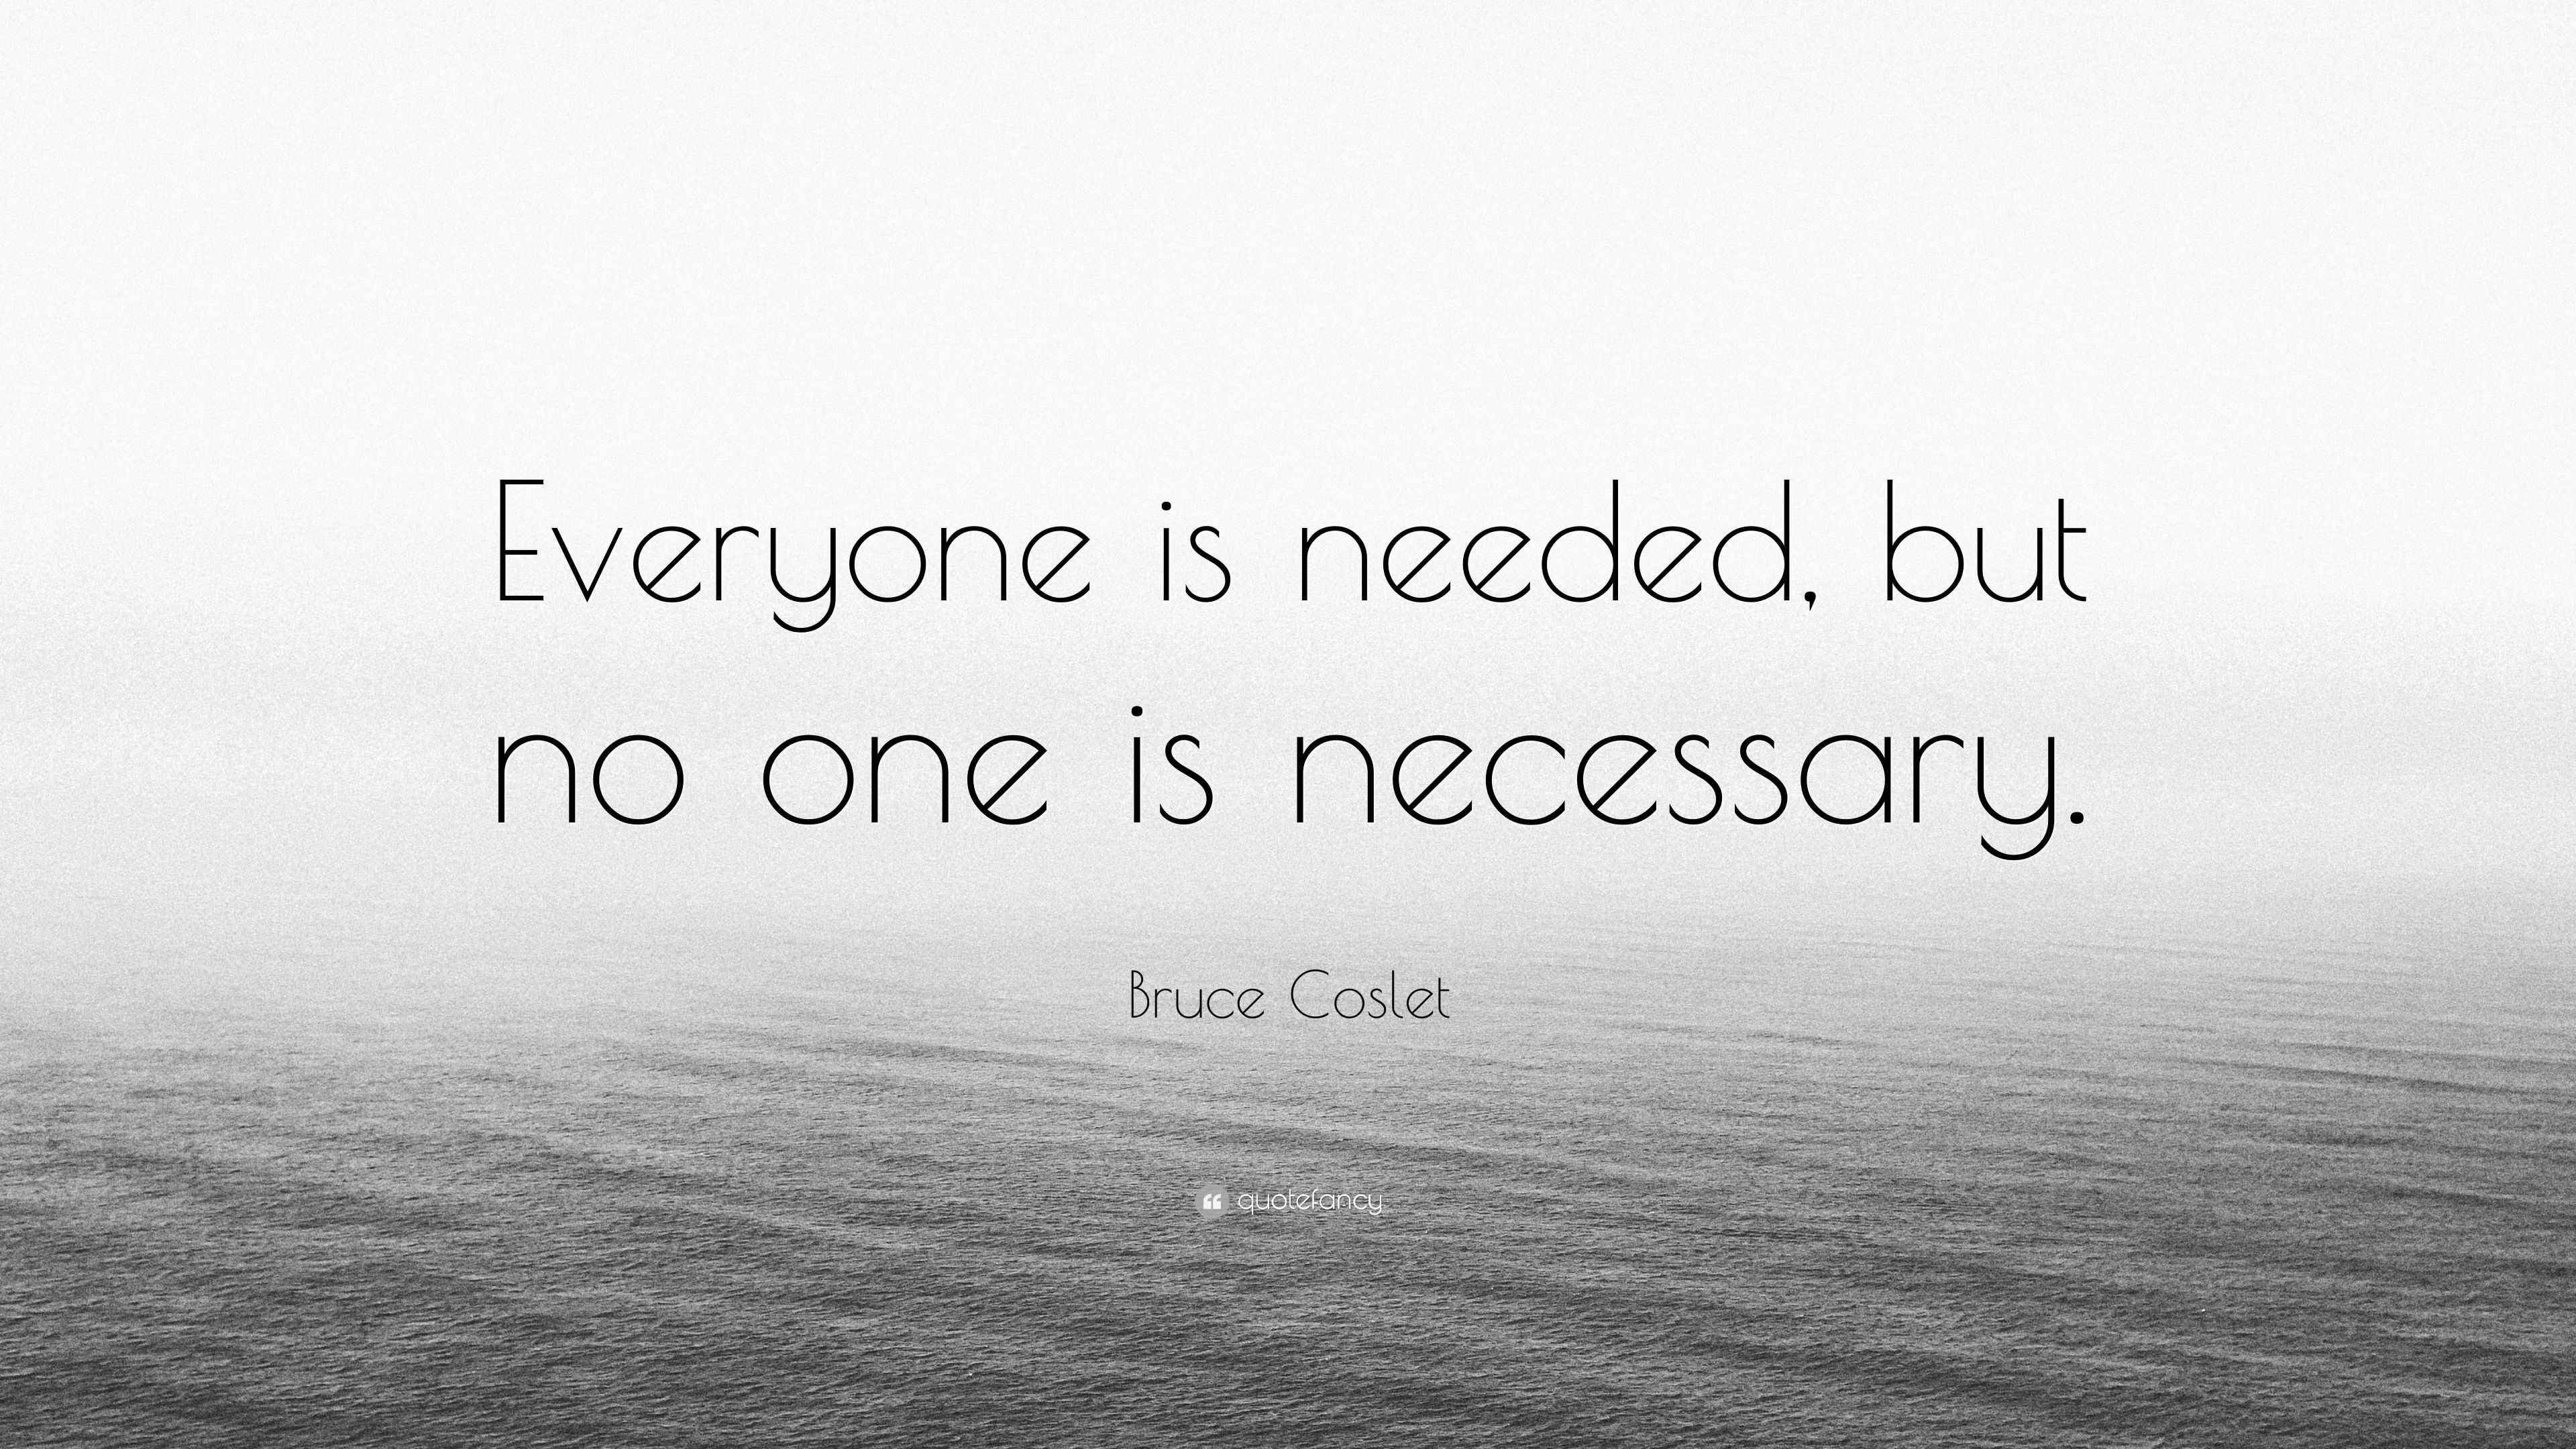 Bruce Coslet Quote Everyone Is Needed But No One Is Necessary